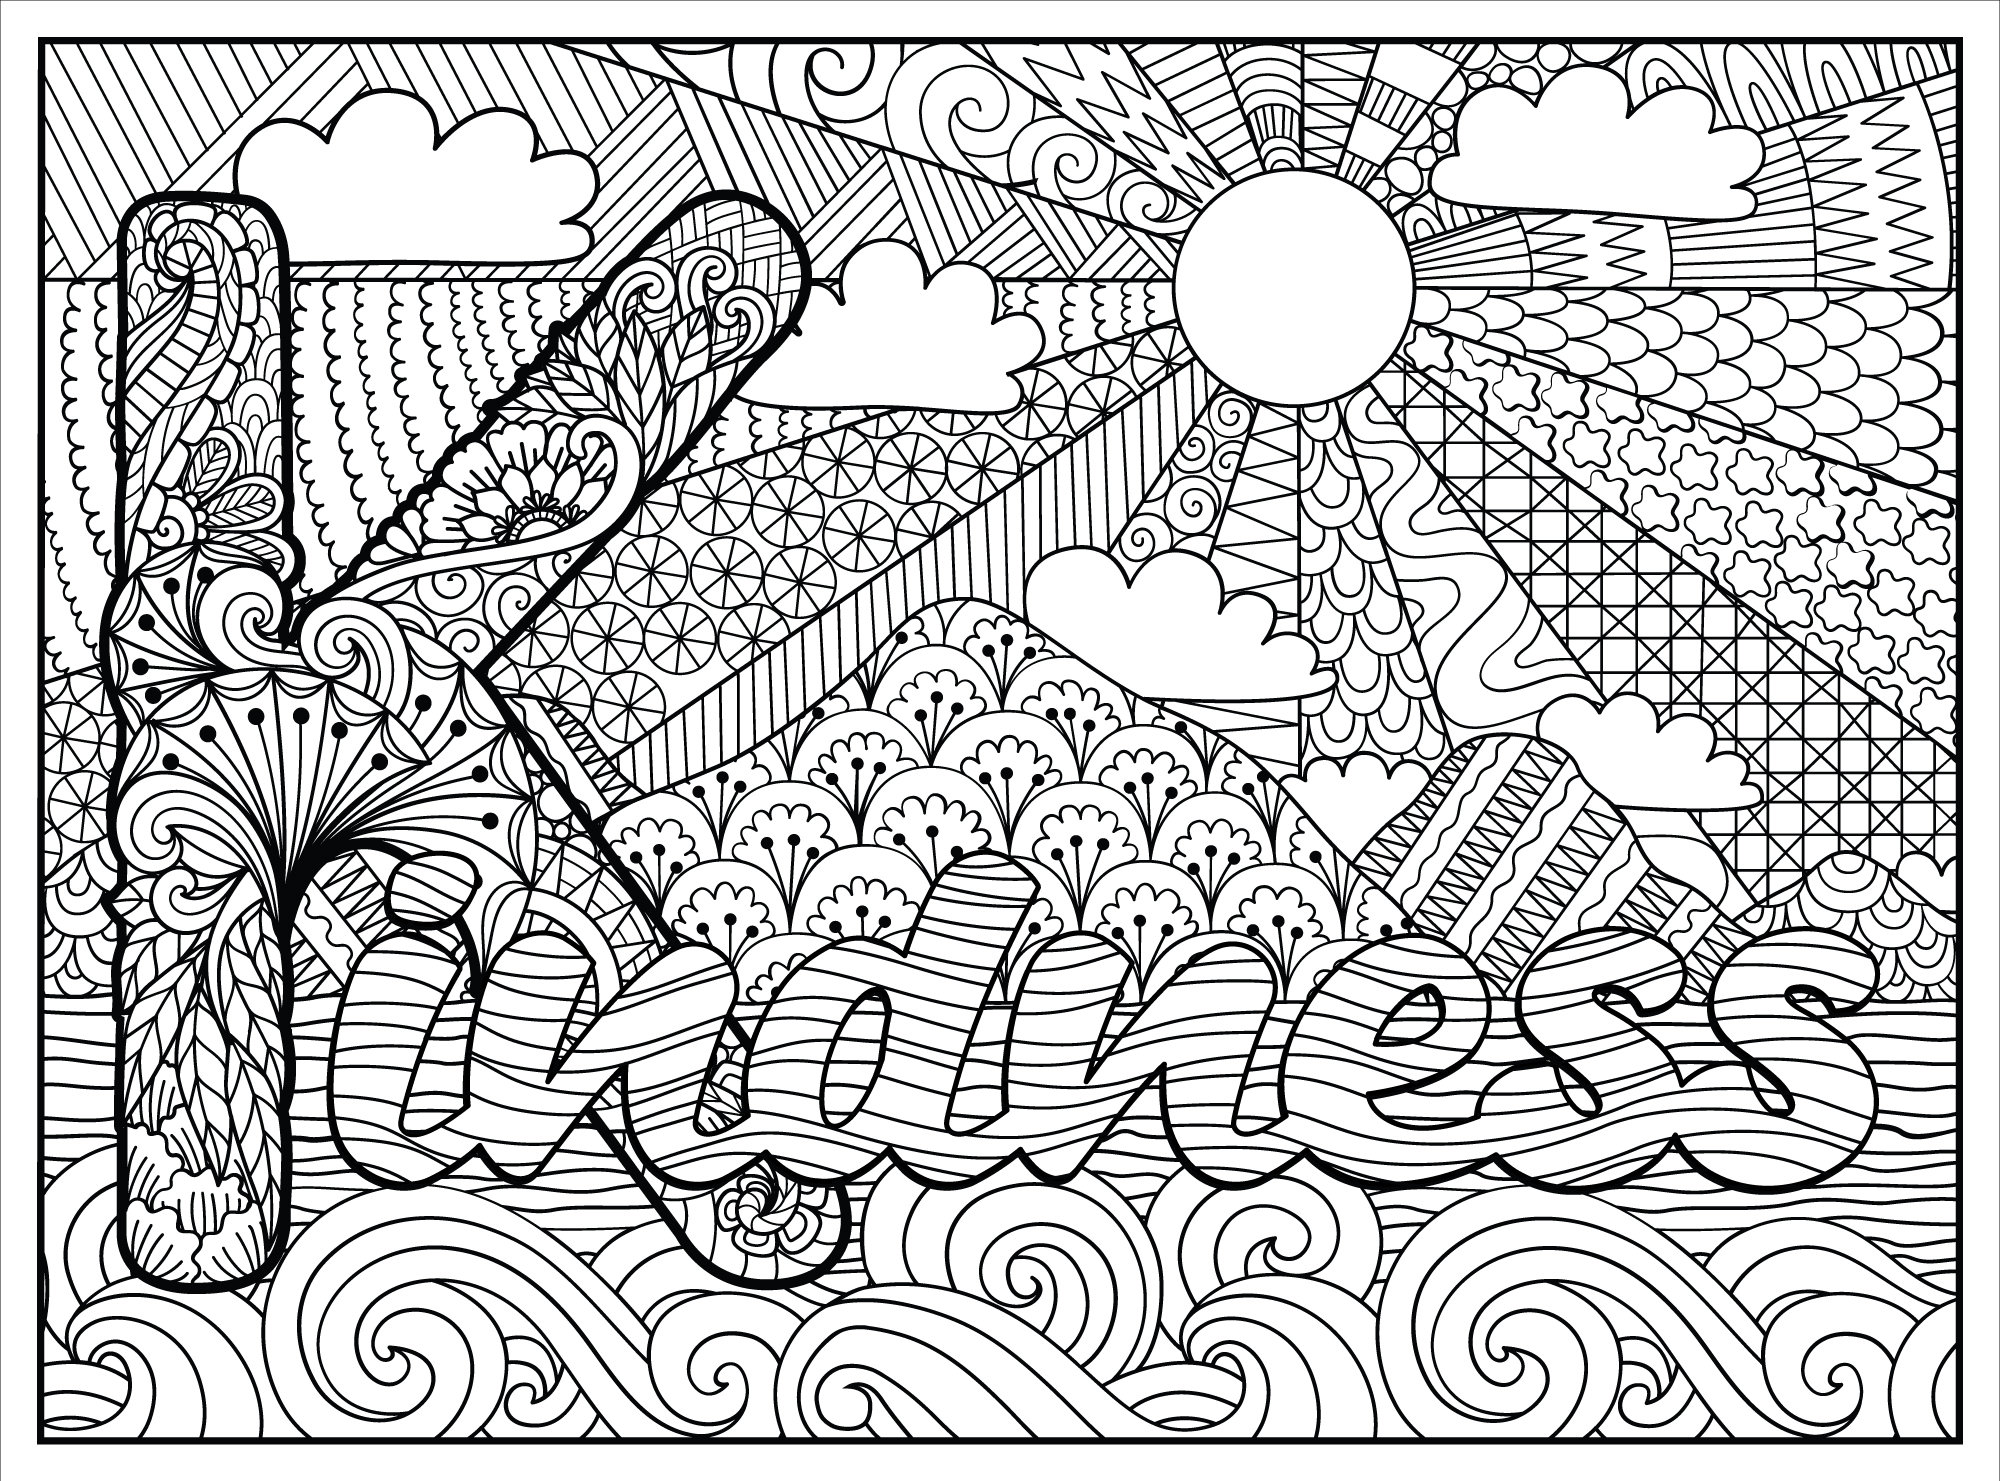 Jumbo Coloring Poster! Color and Play! Candytown Theme